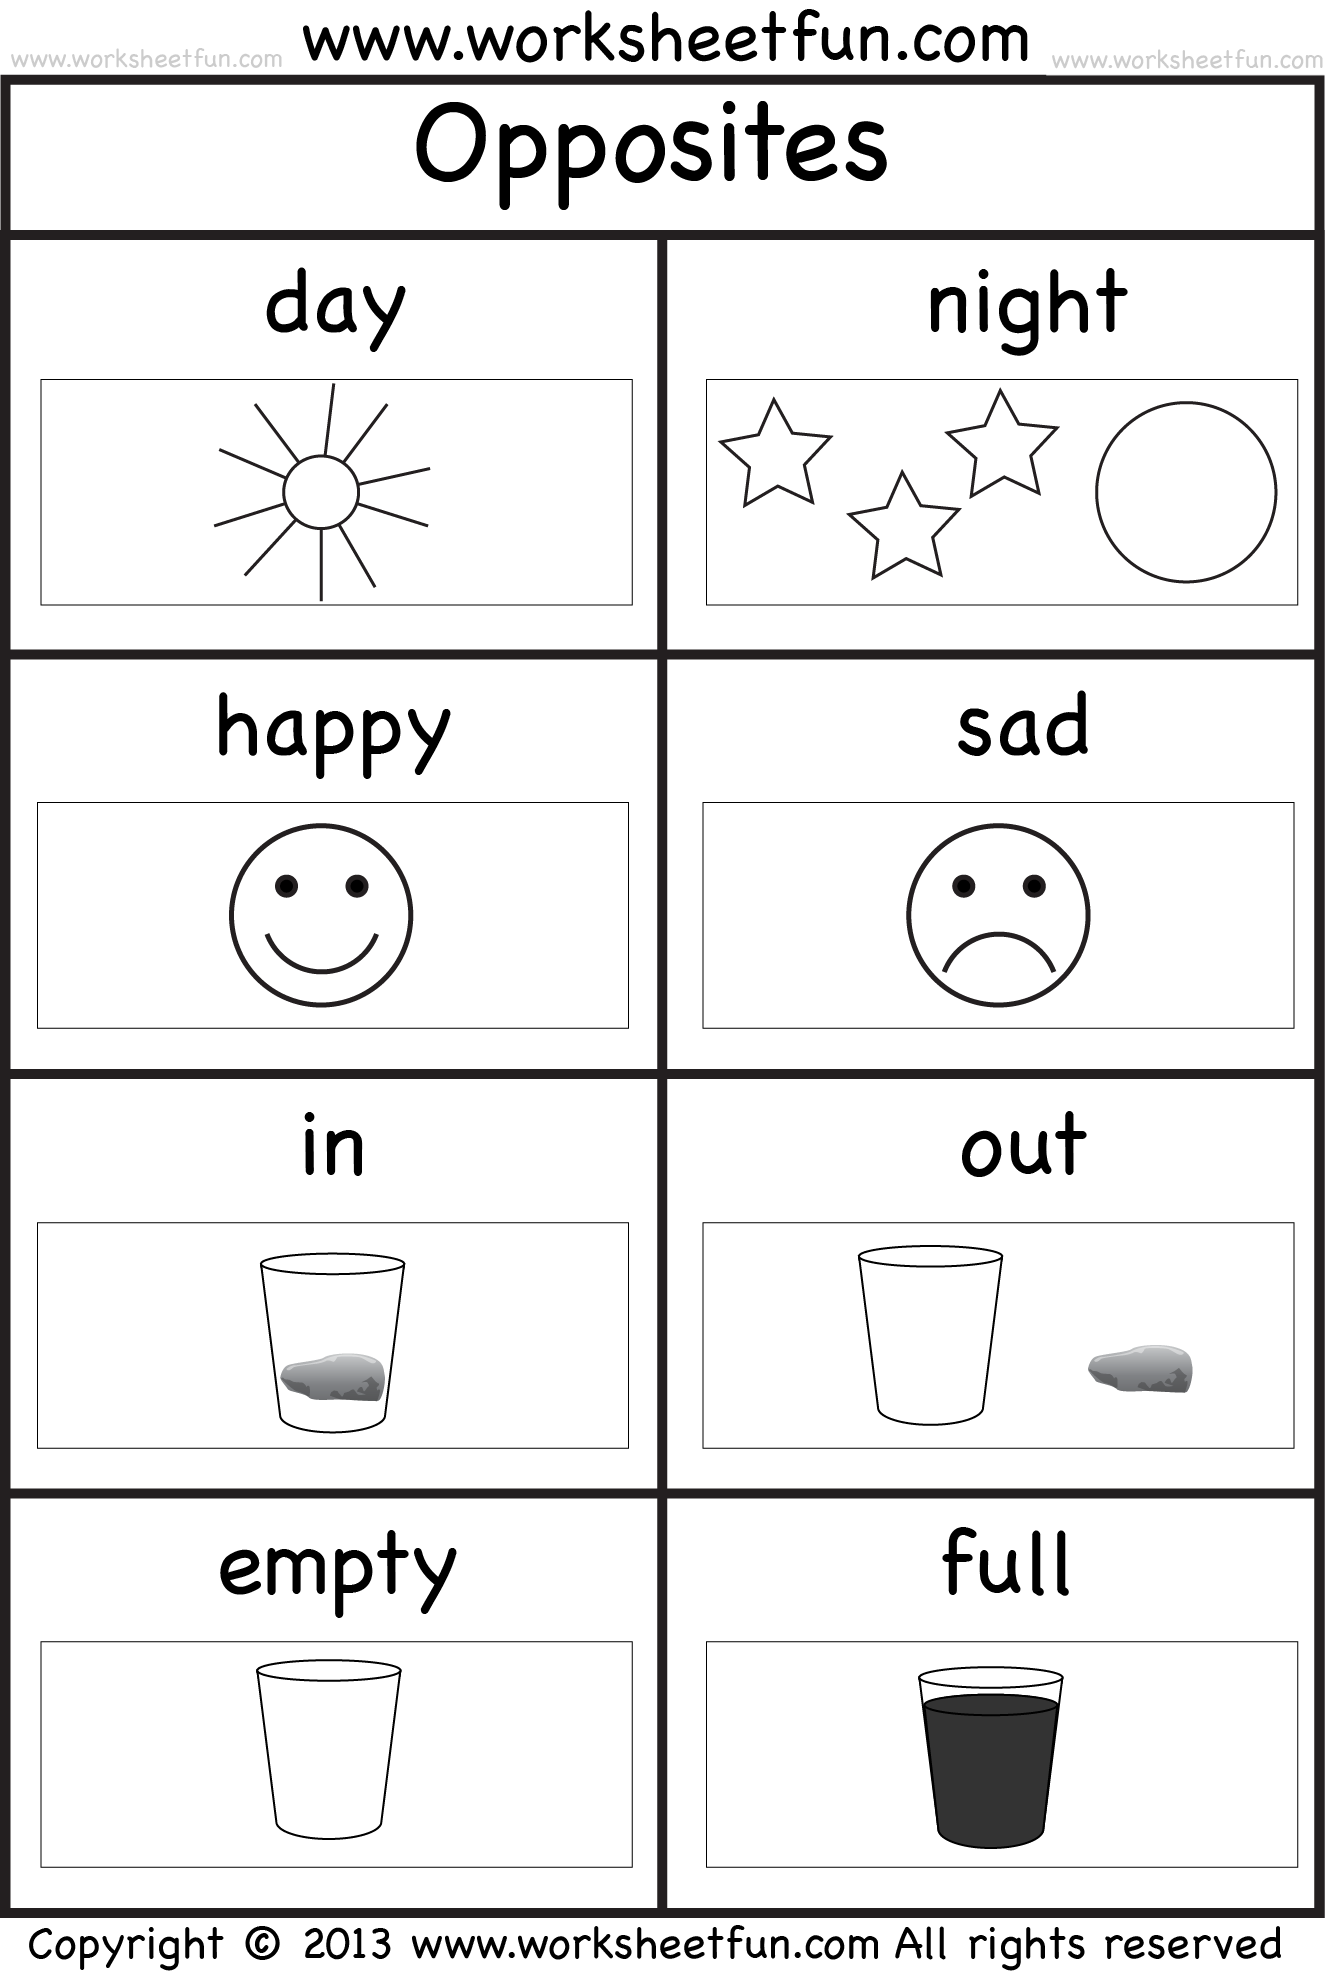 gambar-opposites-colouring-pages-pre-school-children-picture-fast-slow